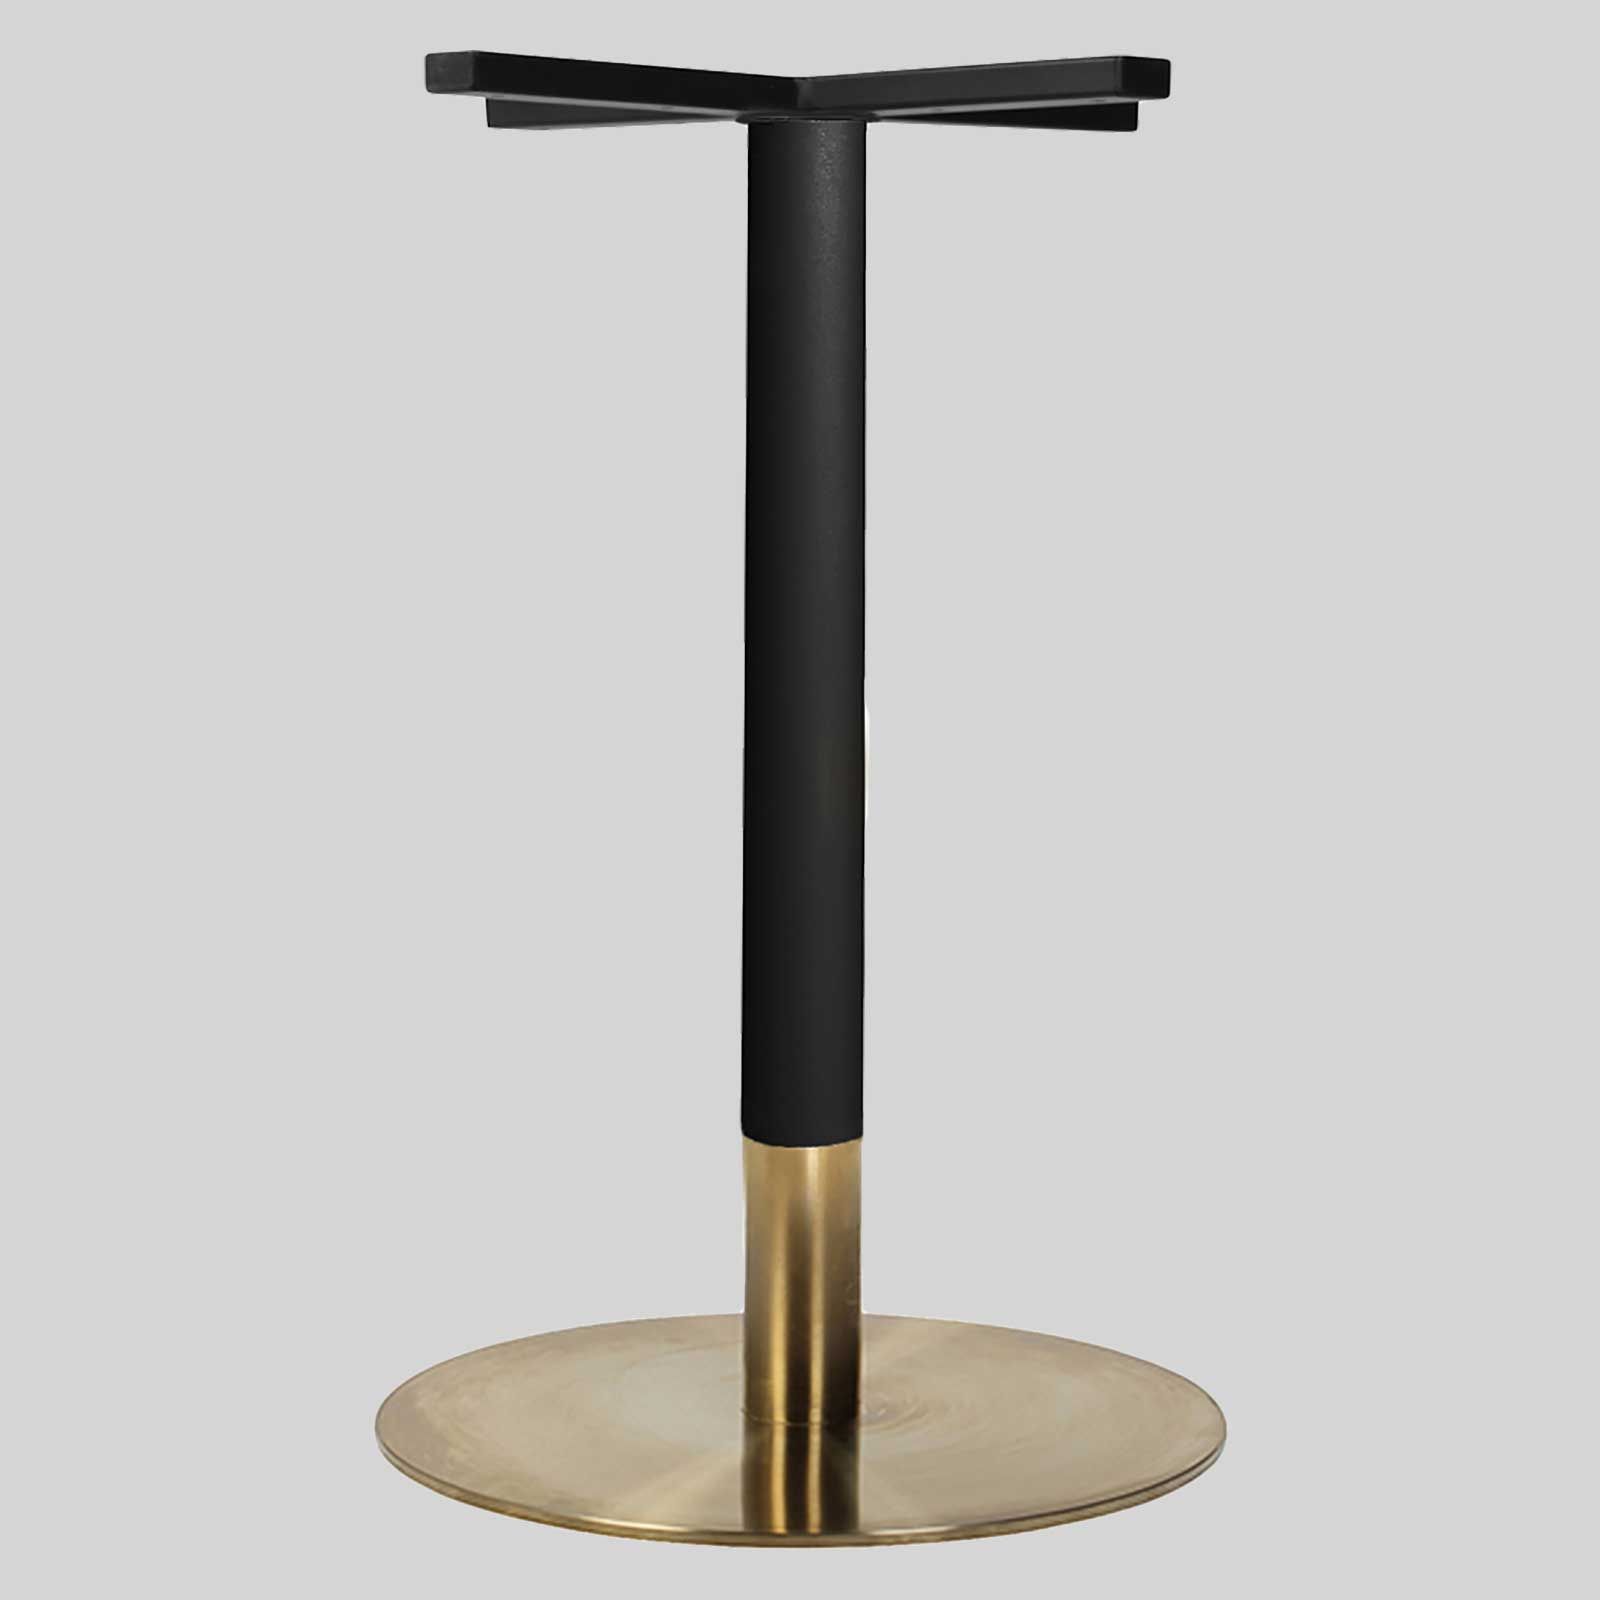 Brass Table Base And Copper Table Bases For Restaurants For Most Up To Date Black Top  Large Dining Tables With Metal Base Copper Finish (View 25 of 30)